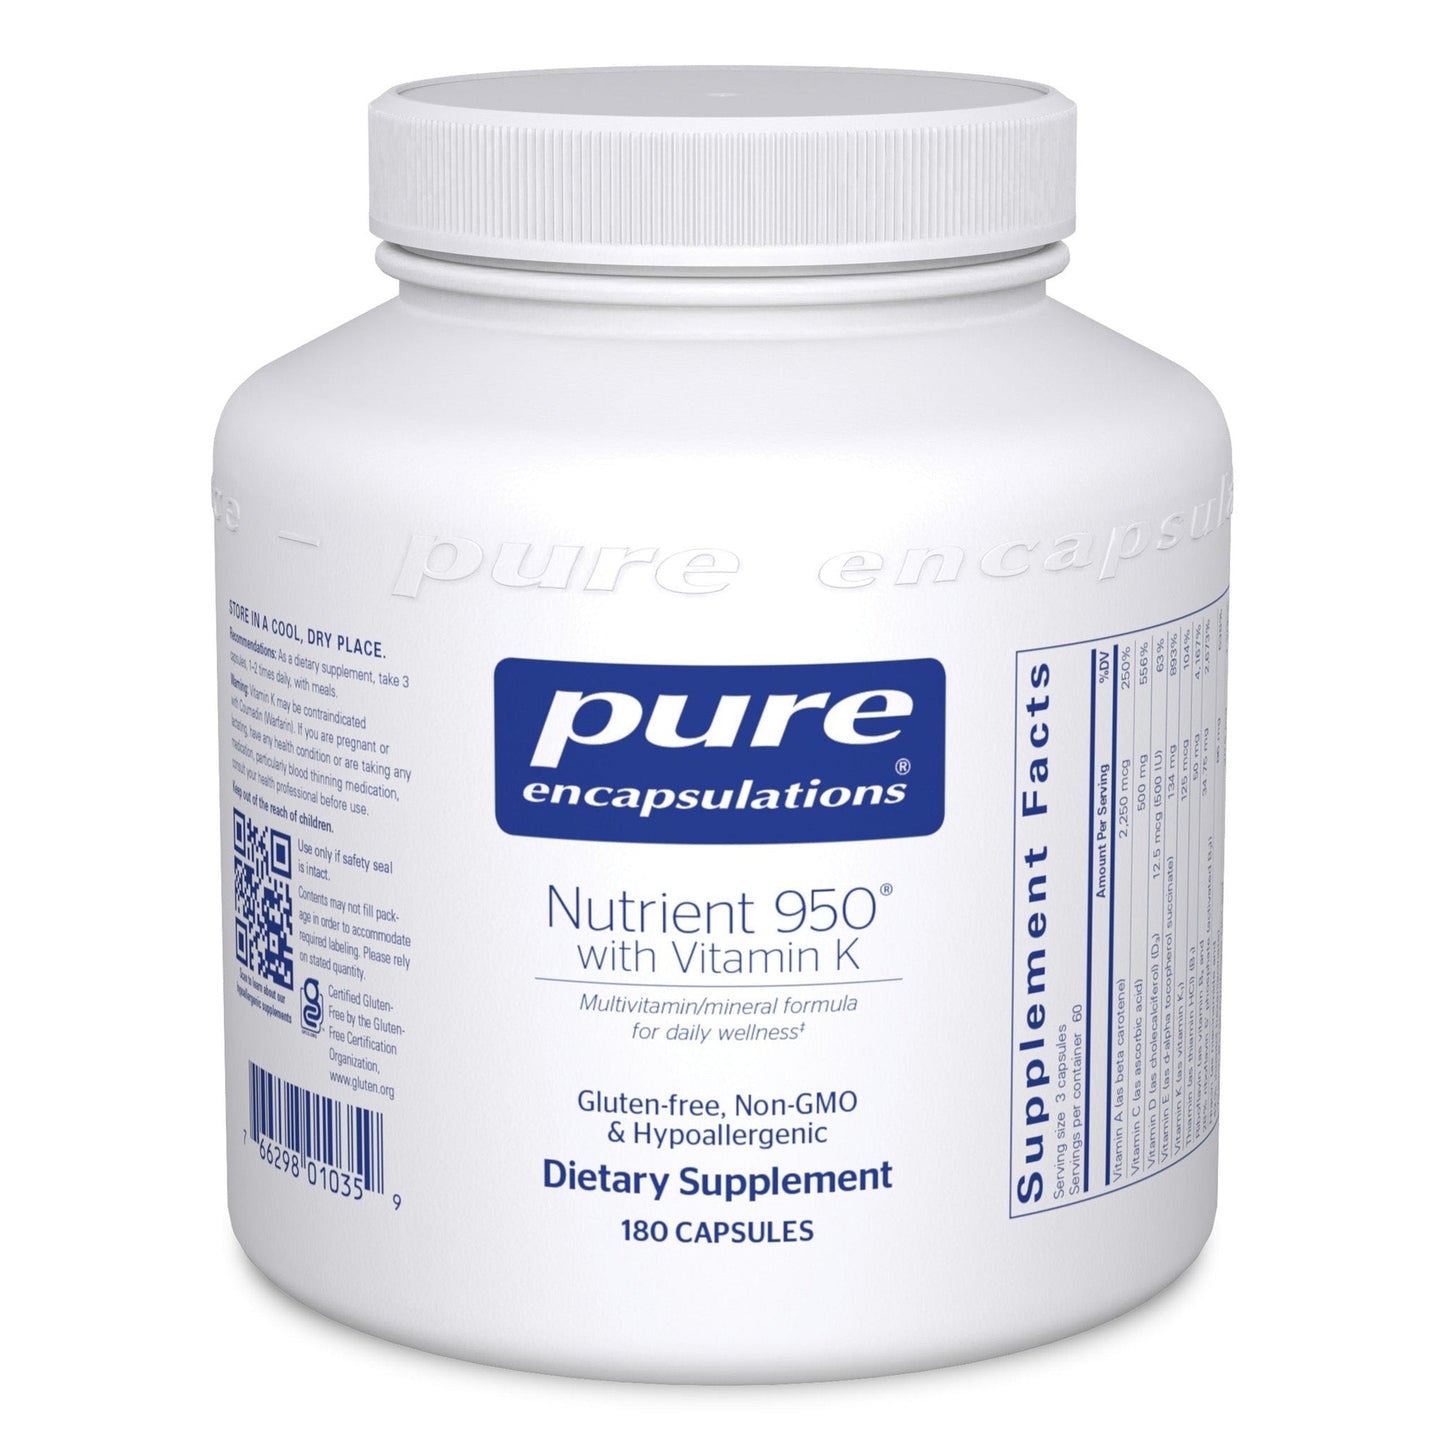 Nutrient 950 with Vitamin K